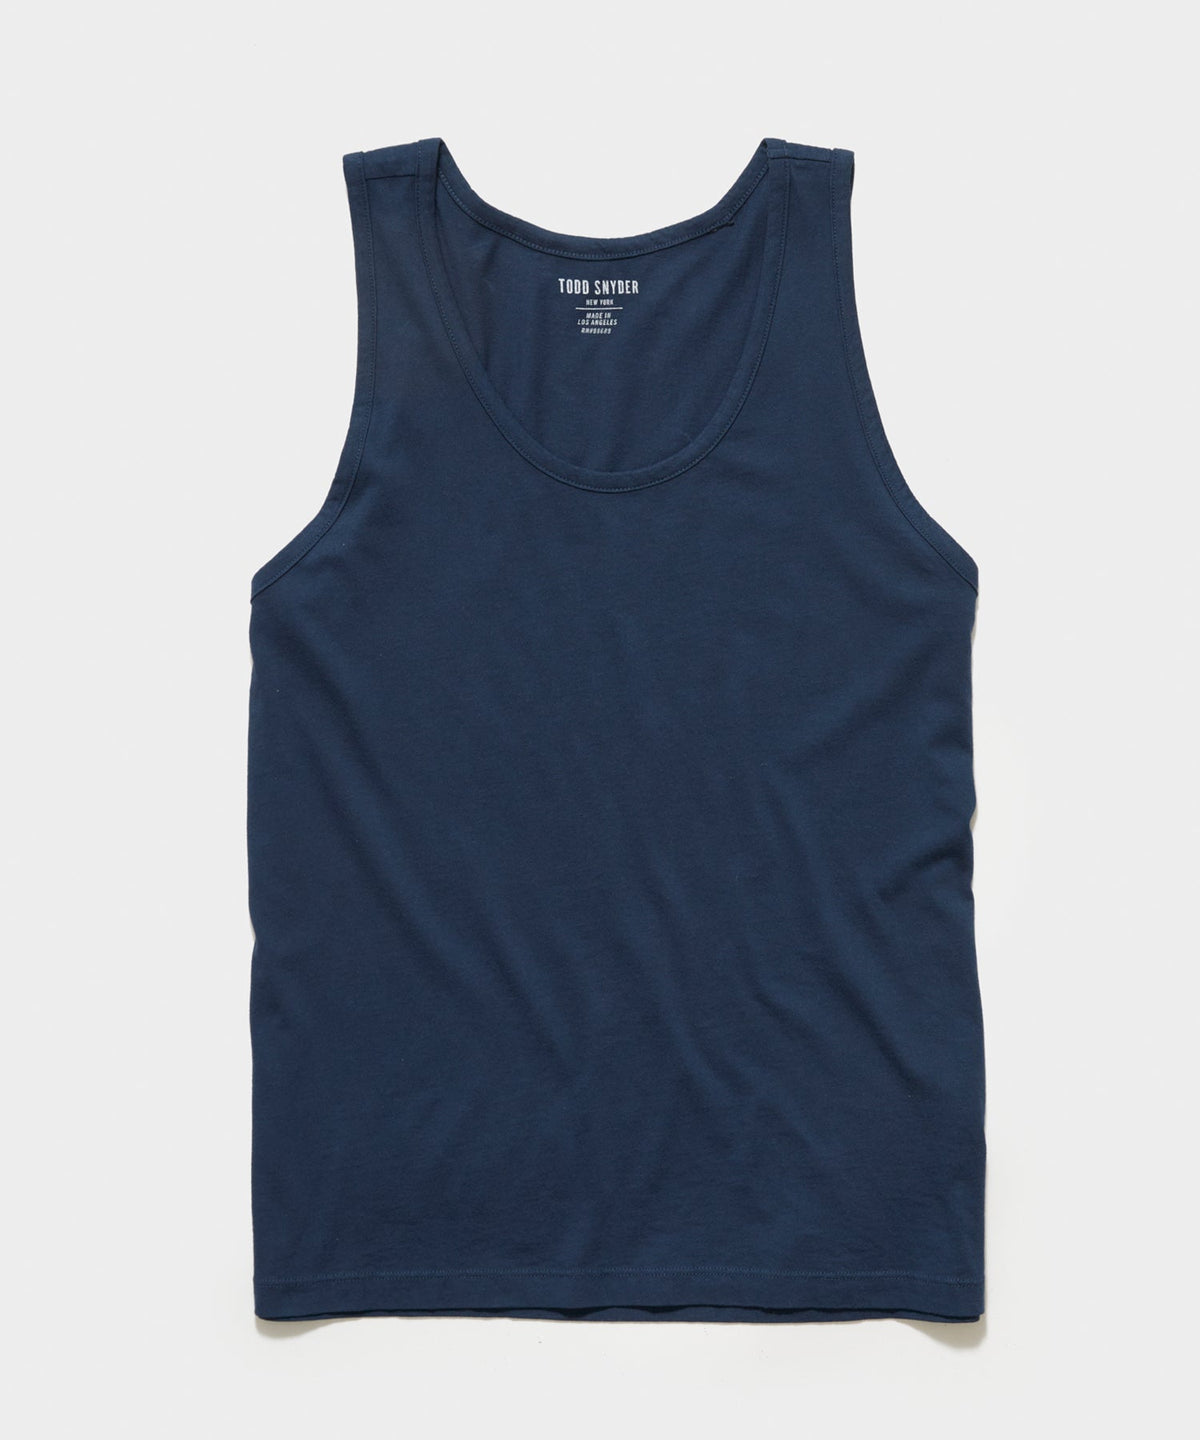 Made in L.A. Tank Top in Navy